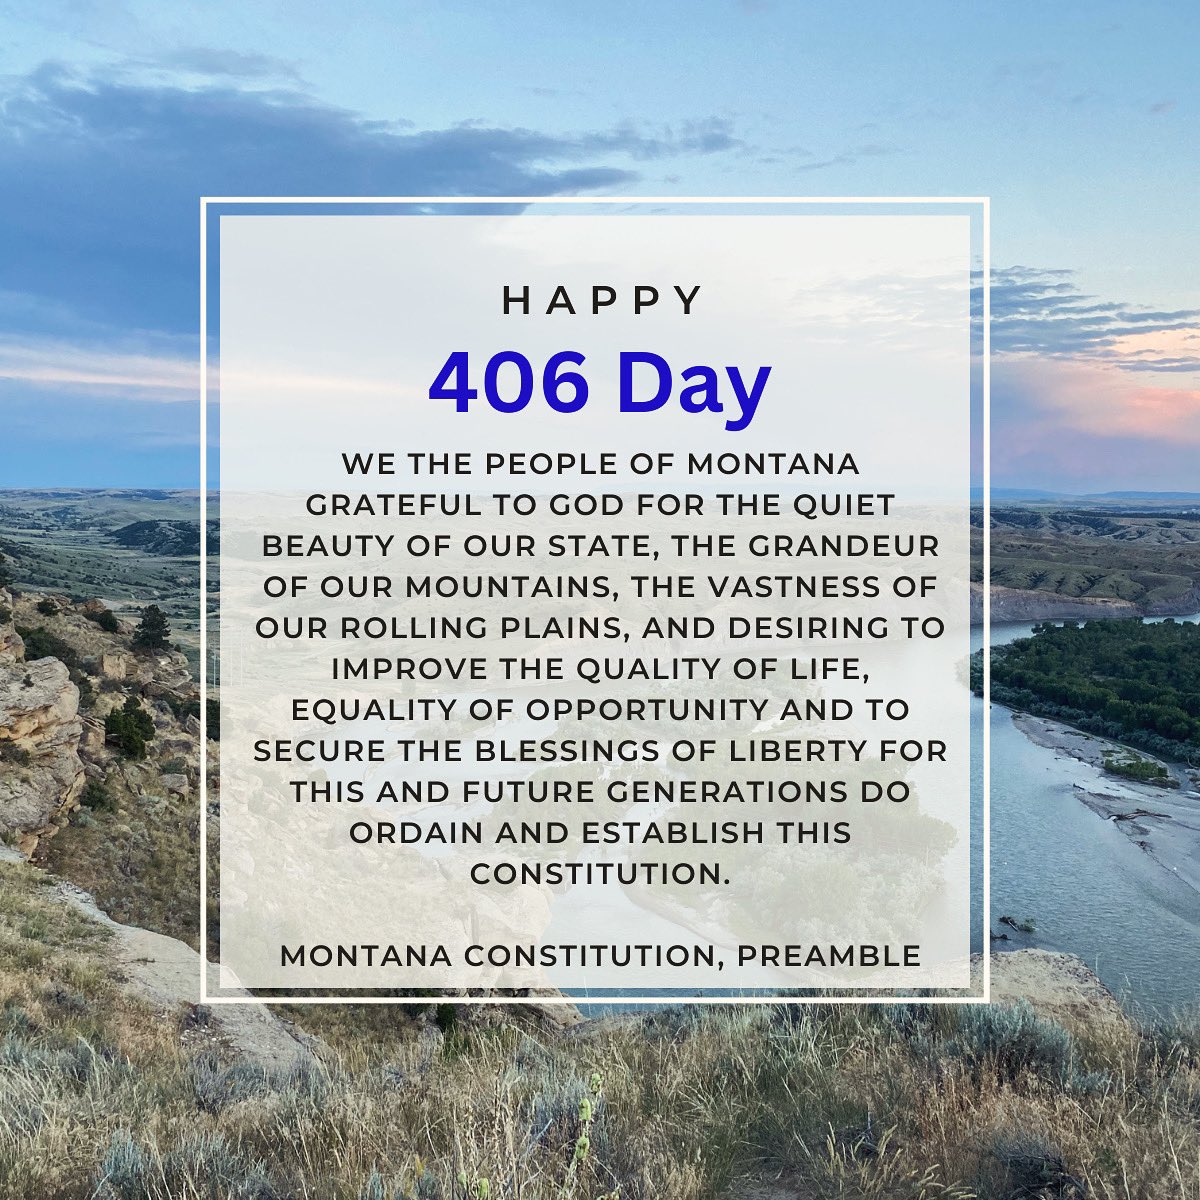 Happy 406 Day! I love #bigskycountry and I am especially thankful for our Montana Constitution that protects our inalienable rights and freedoms that make life worth living! Every time I read our constitution’s beautiful preamble I am re-inspired! #mtpol #406day #montana